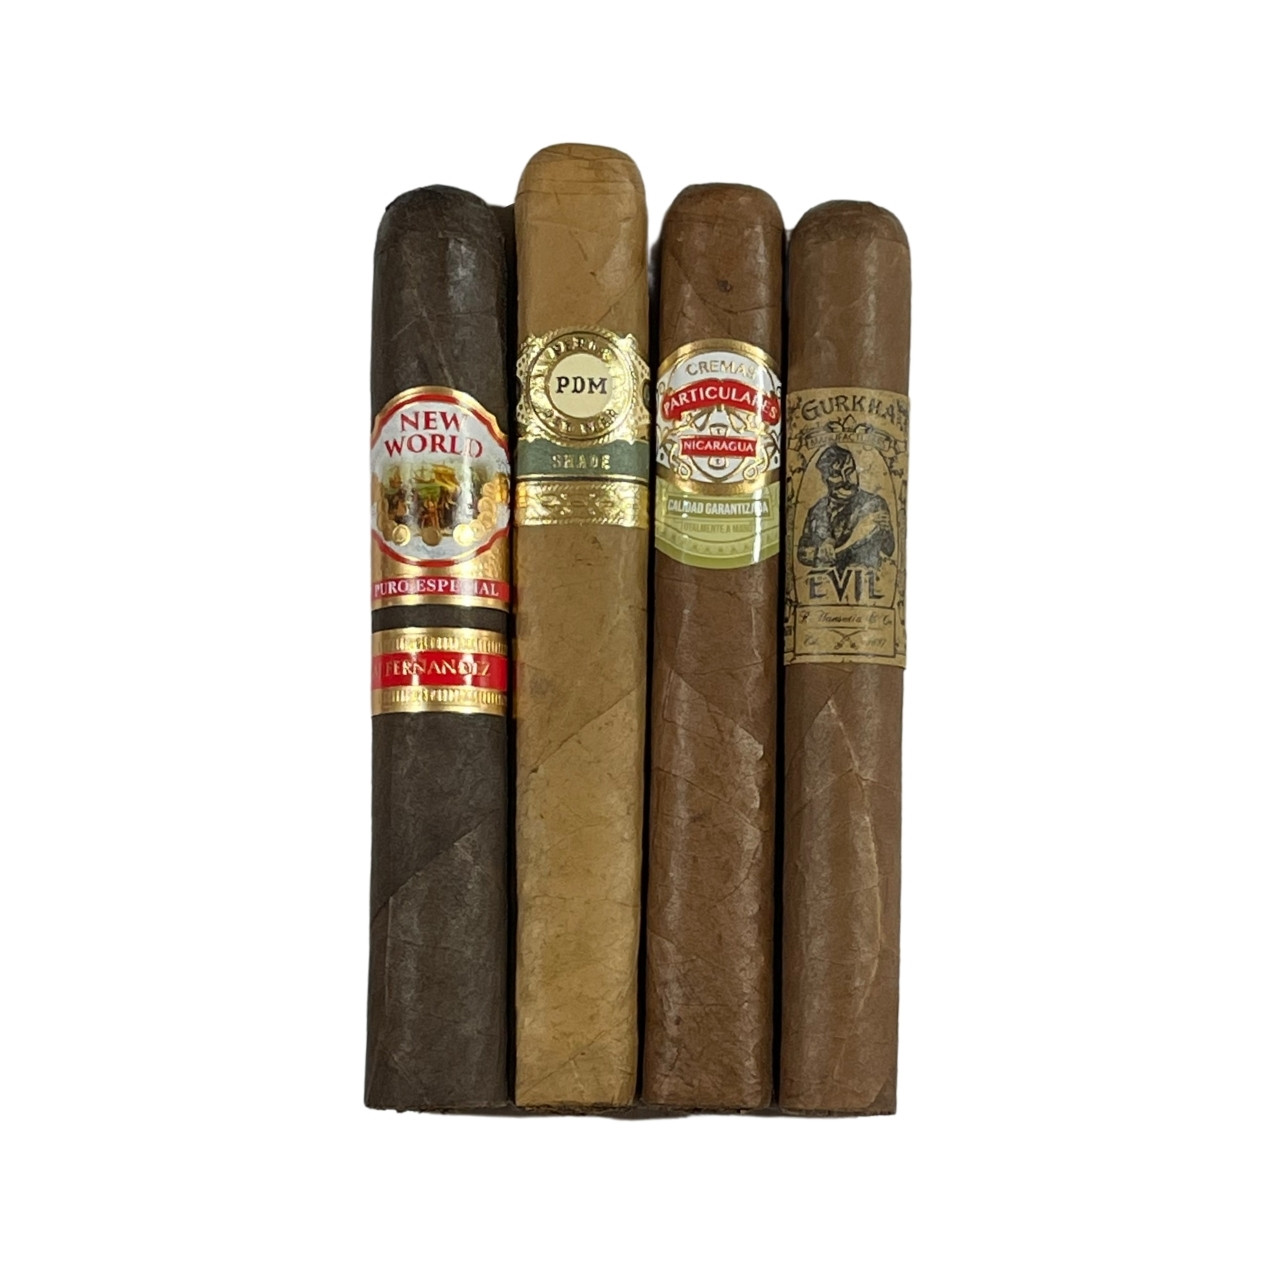 All Nicaraguan and all Toro sized at a great value.